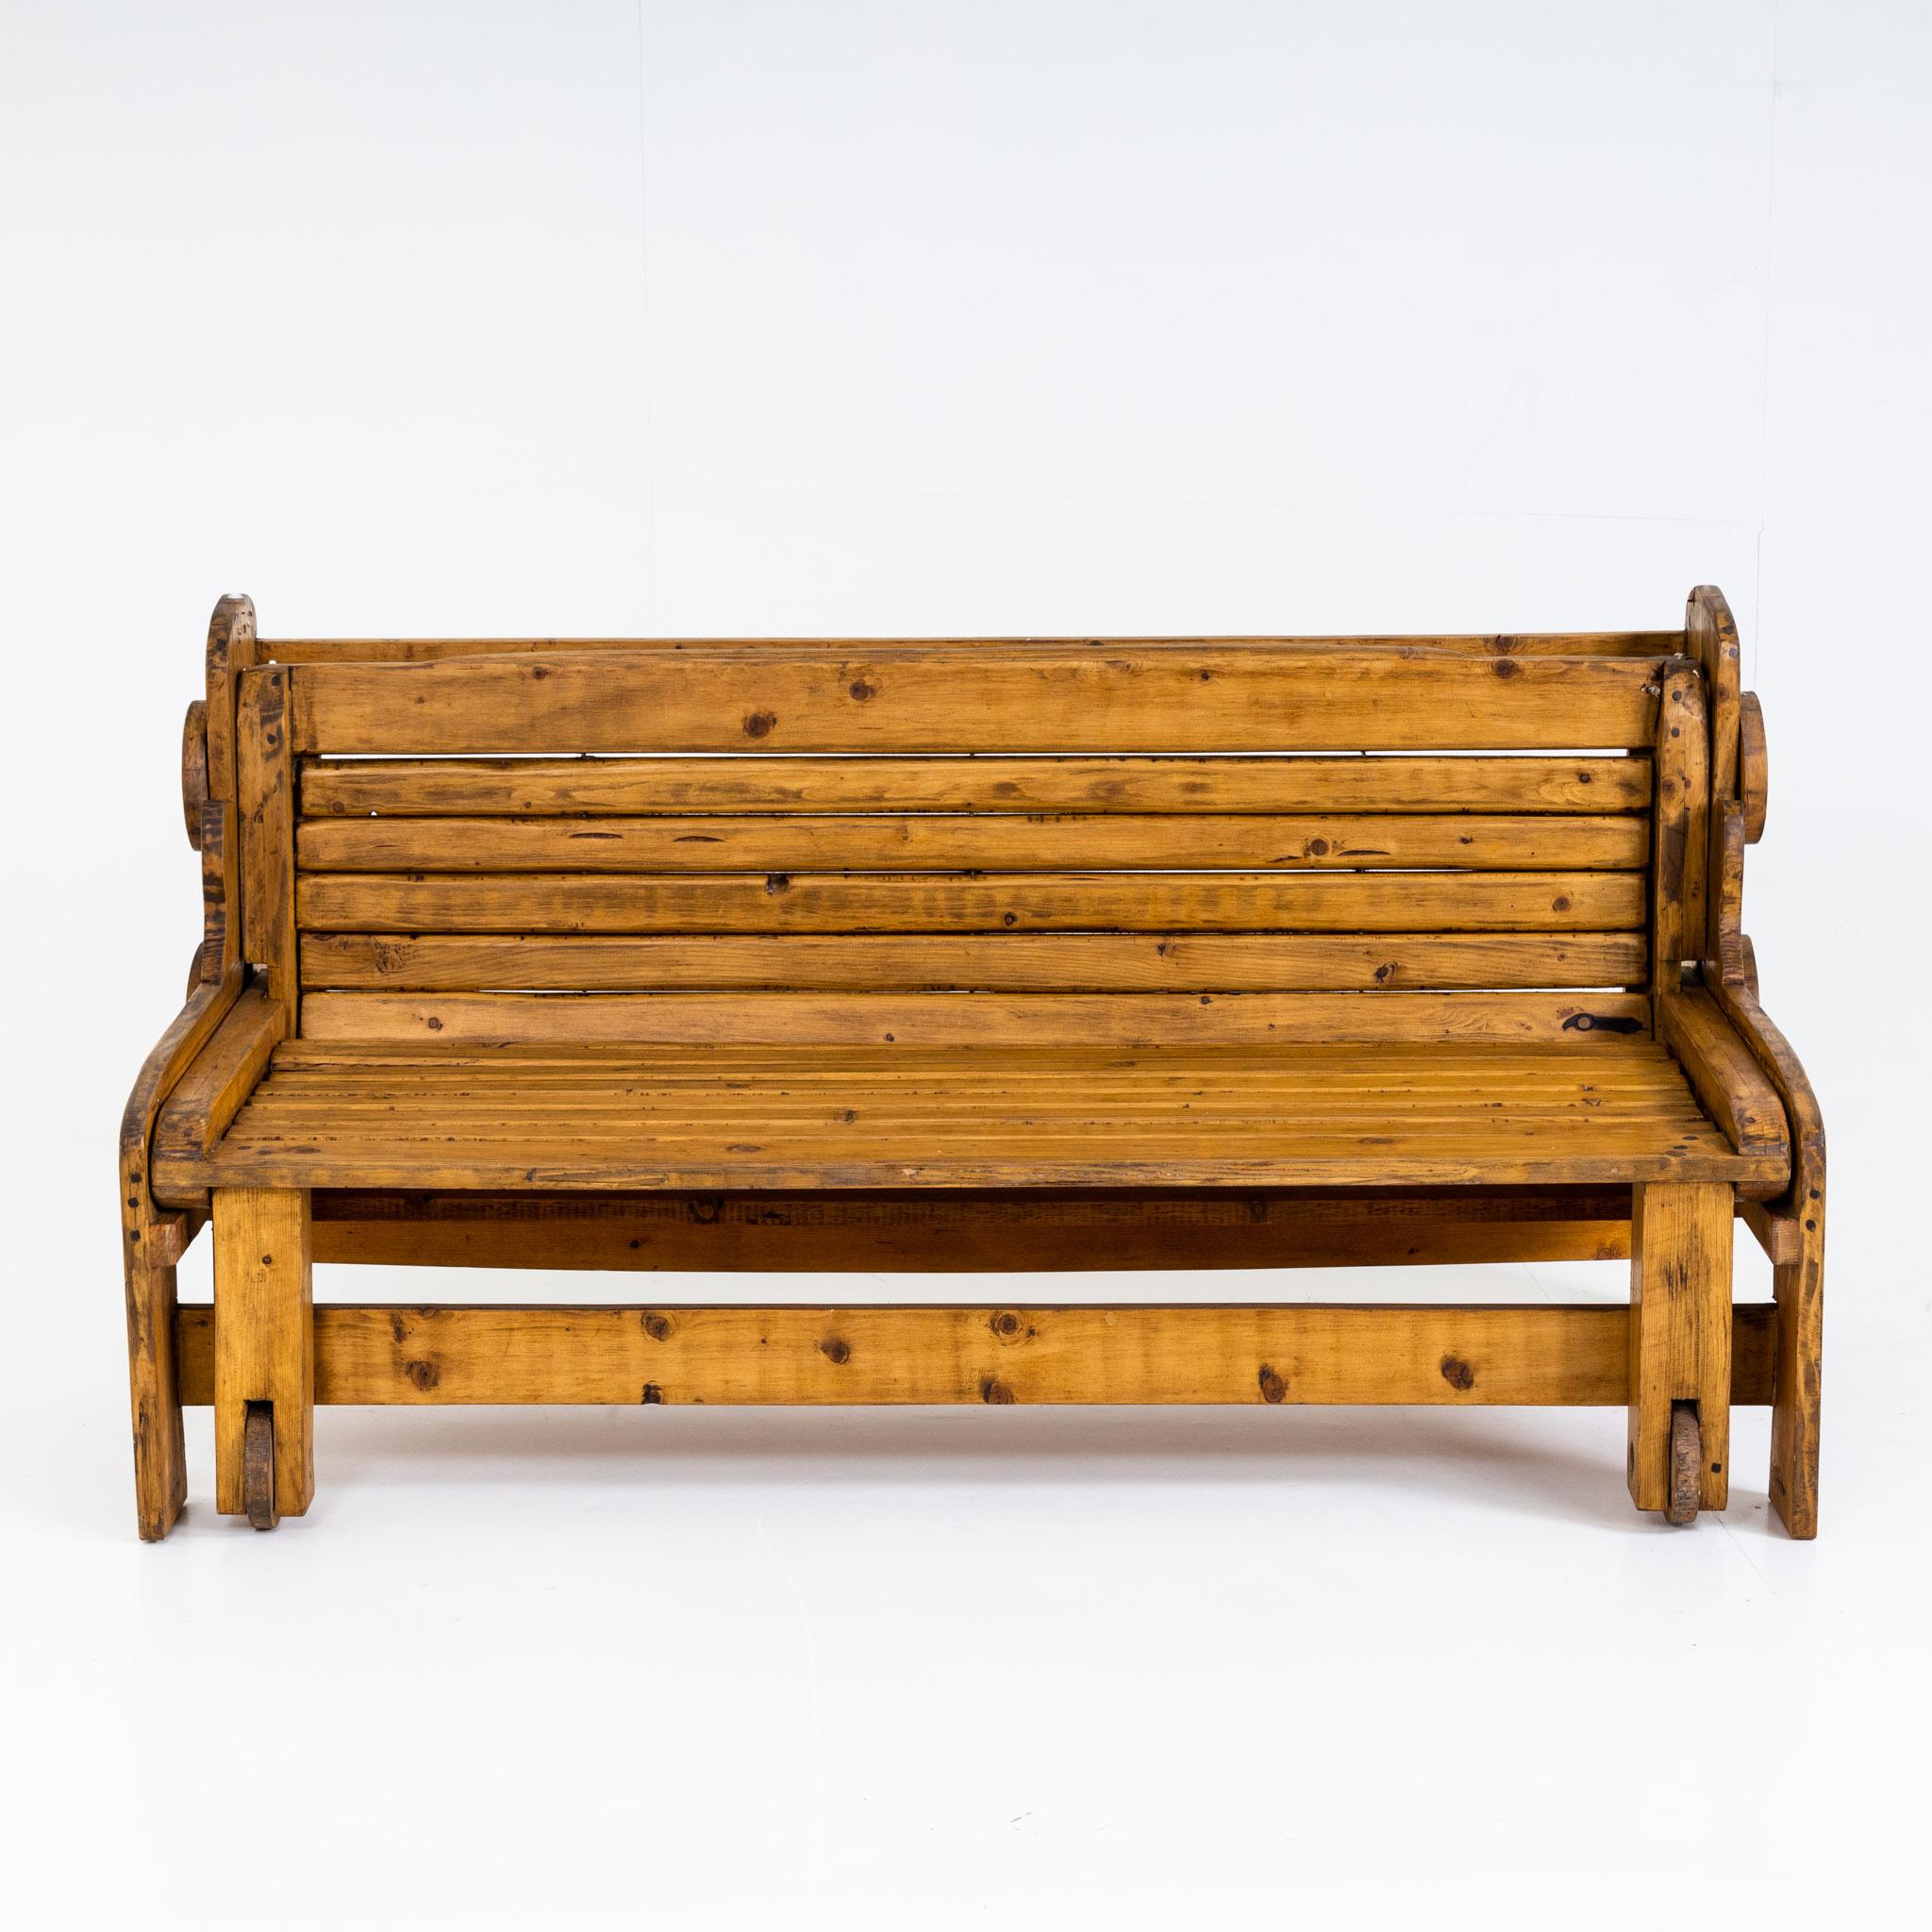 Pair of benches with extendable recliners made of beech wood. Very nice natural patina.